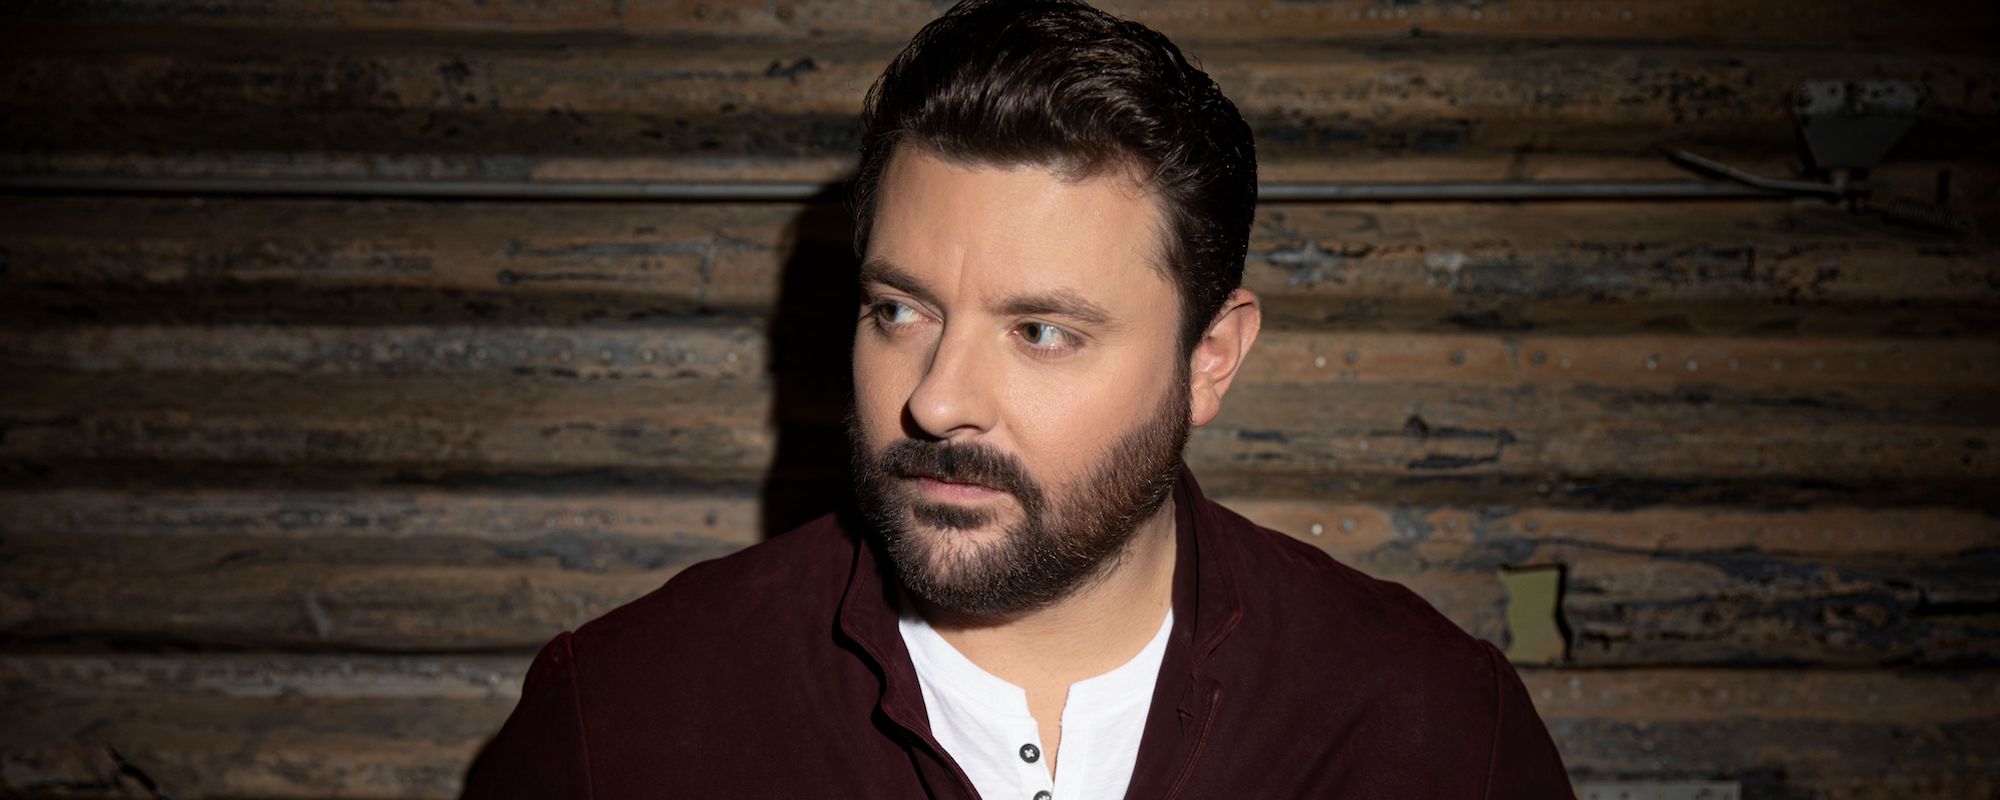 “Stop Coming At Me”: Chris Young Breaks Silence After Charges Dropped in Nashville Arrest